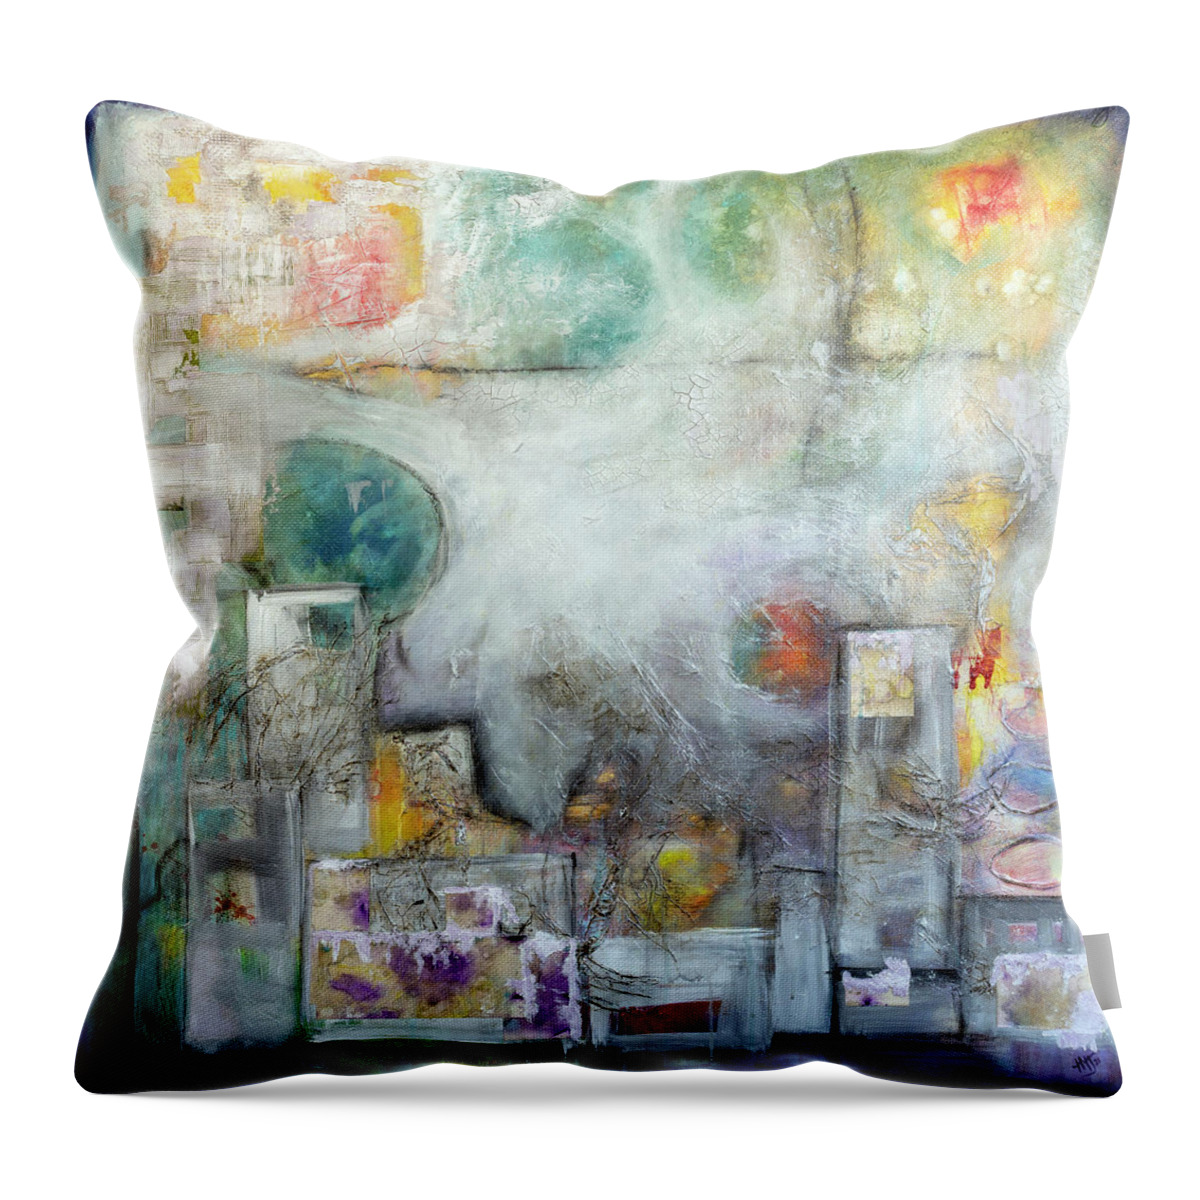 Abstract Throw Pillow featuring the painting Spring Obscura by Theresa Marie Johnson